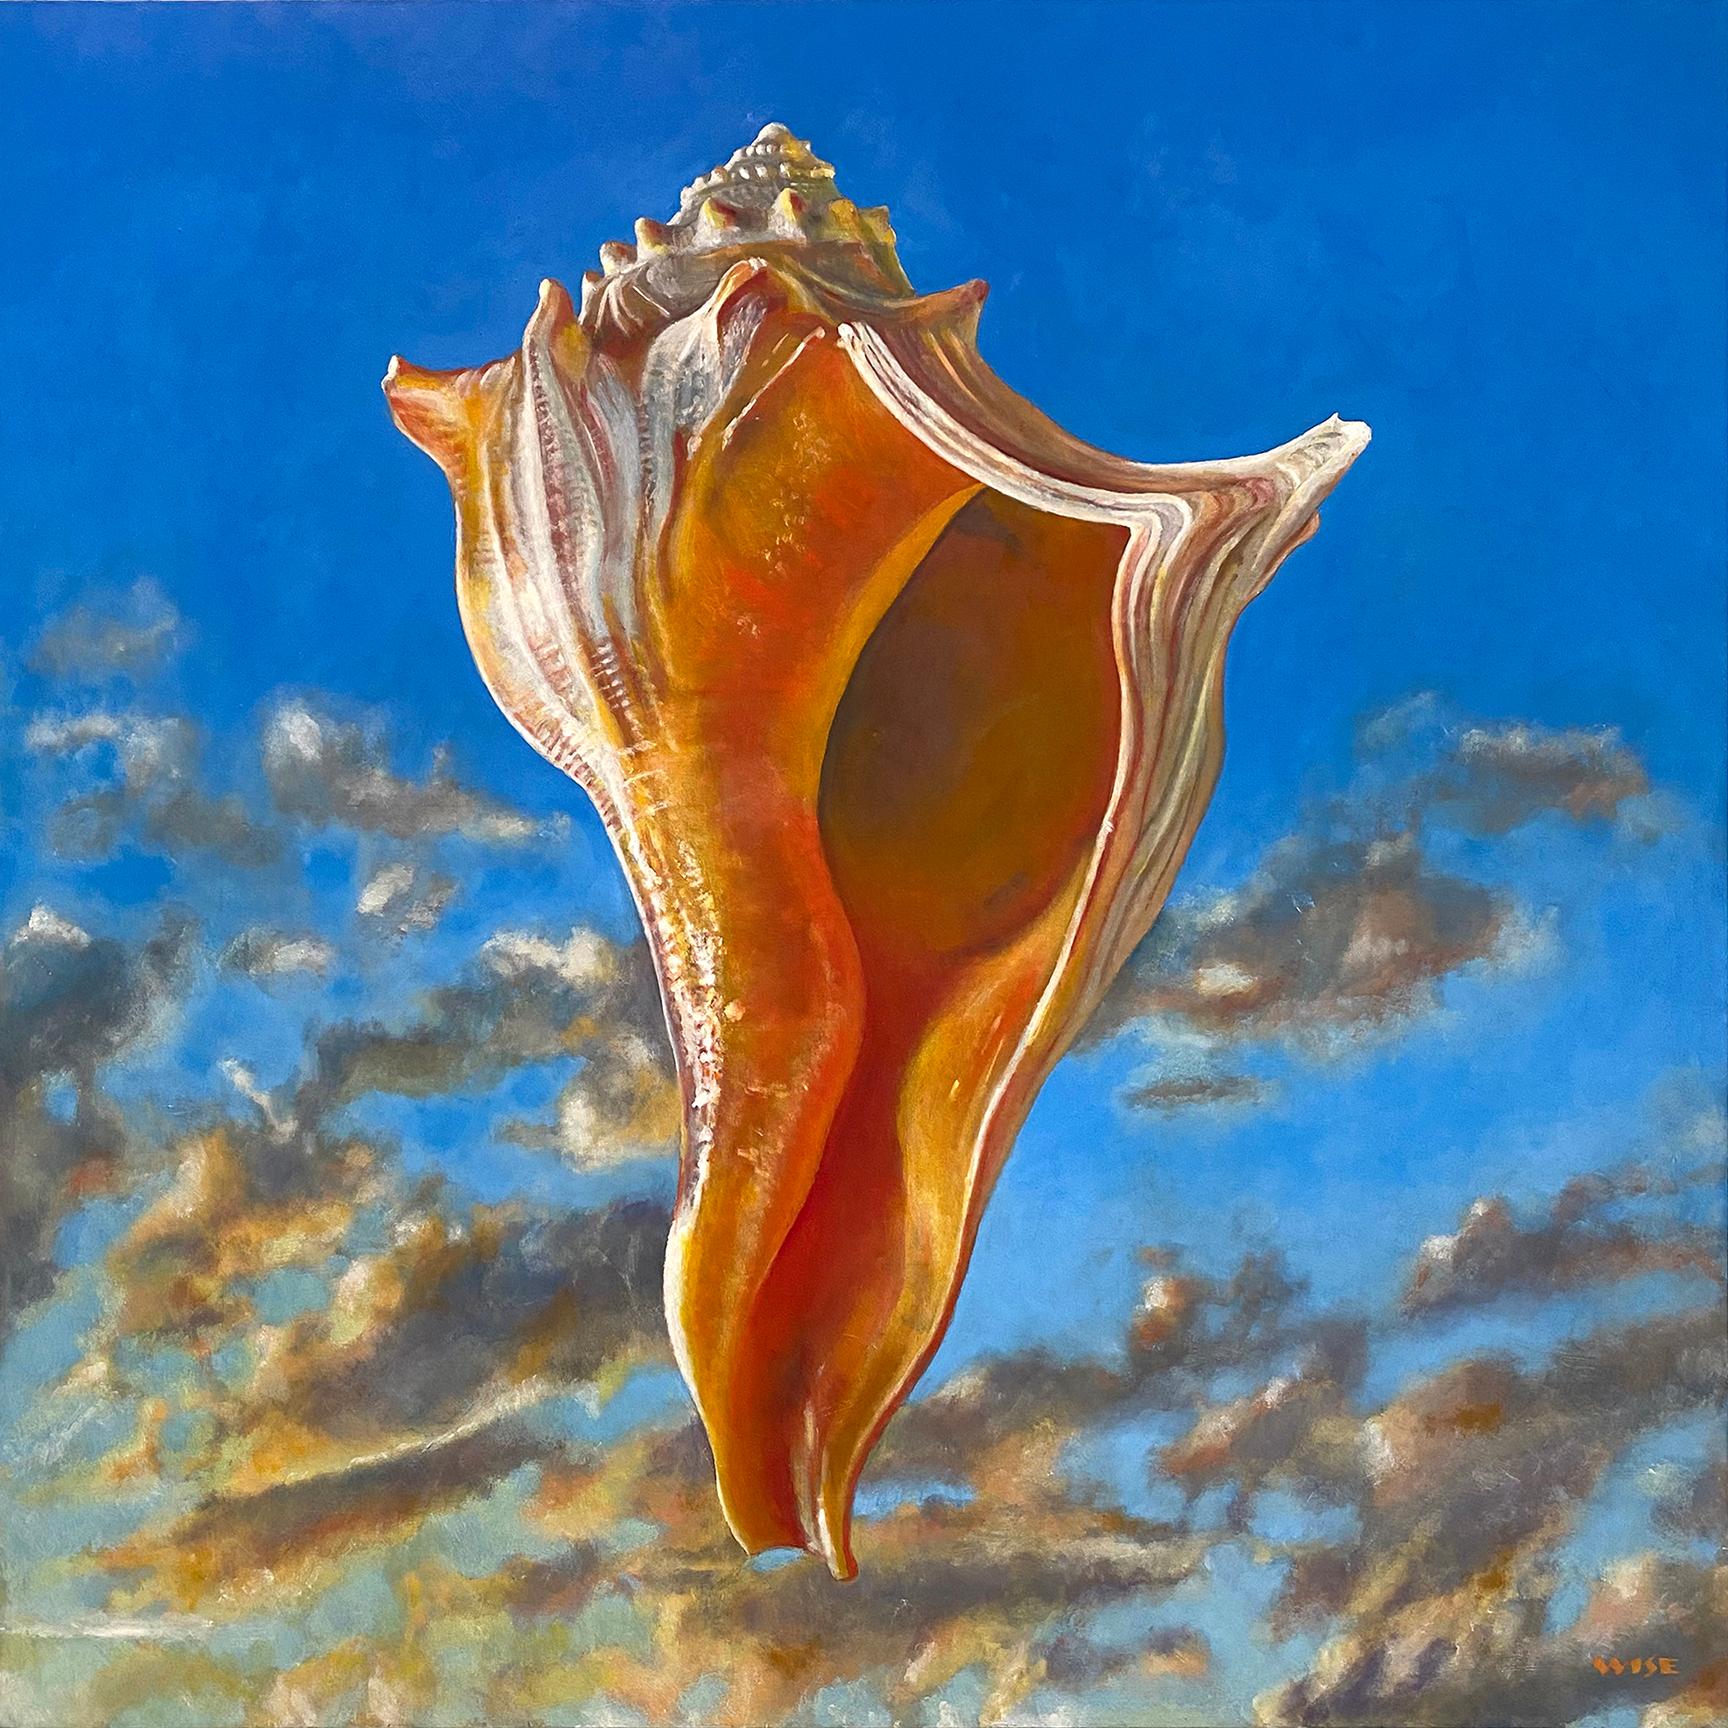 Jim Wise Still-Life Painting - "Arcanum" - shell painting - skyscape - realism - Georgia O'Keeffe